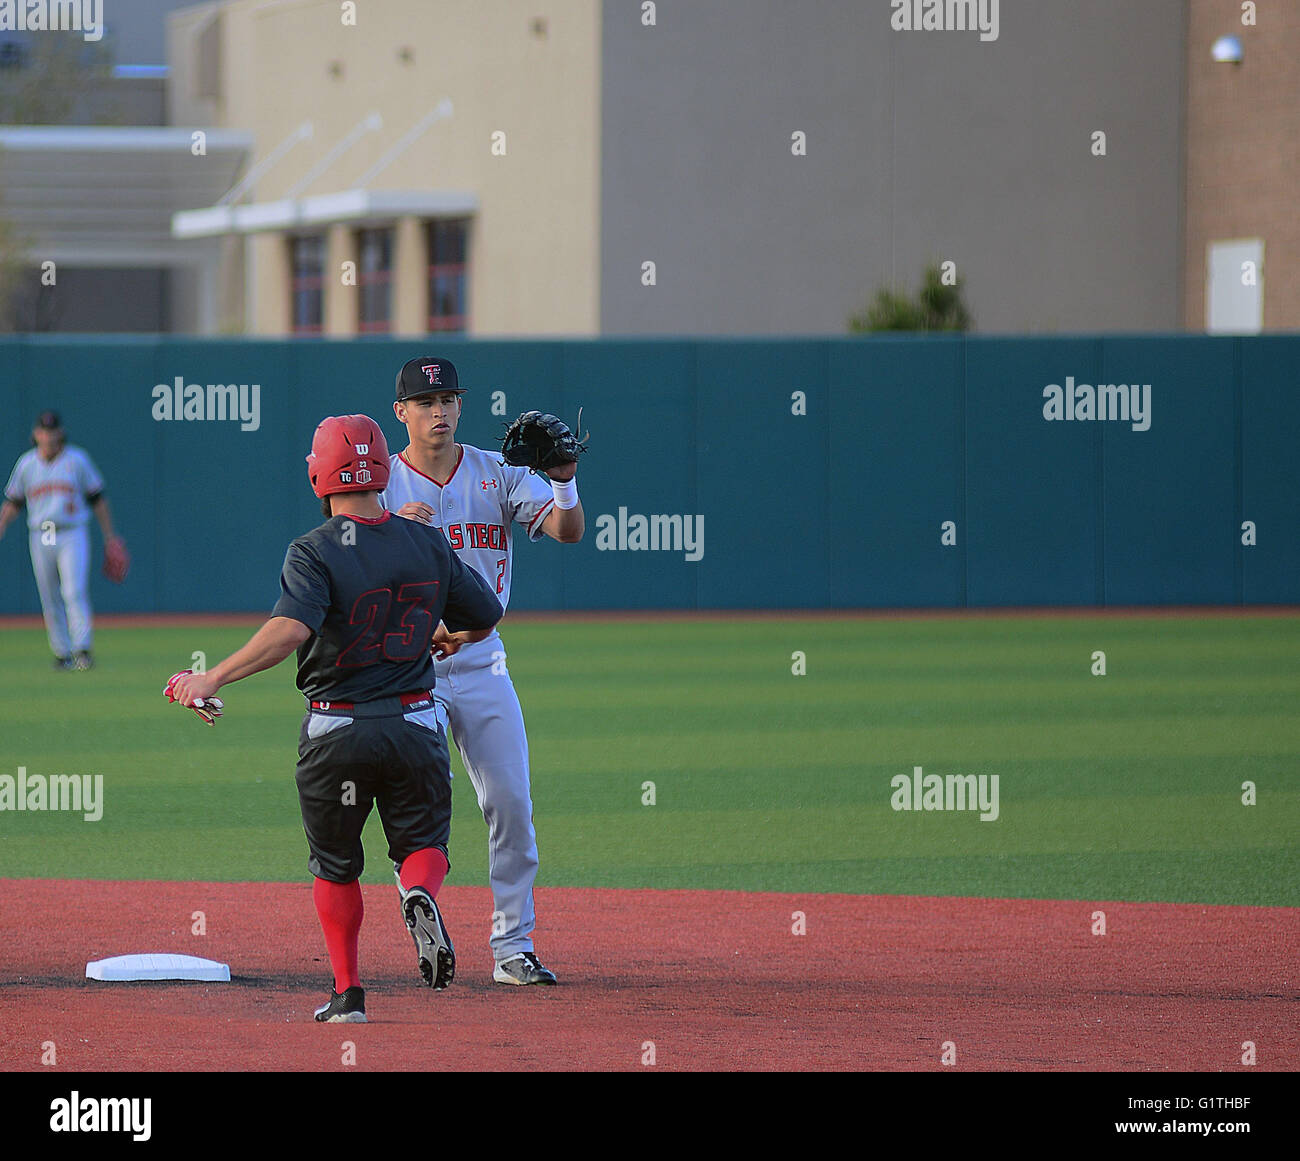 Albuquerque, NEW MEXICO, USA. 19th Apr, 2016. 041916.UNM infielder Jared Holley, left beats Texas Tech 1st base player Orlando Garcia, during the game played at UNM Stadium .Photographed on Tuesday April 19, 2016. Adolphe Pierre-Louis/JOURNAL. © Adolphe Pierre-Louis/Albuquerque Journal/ZUMA Wire/Alamy Live News Stock Photo